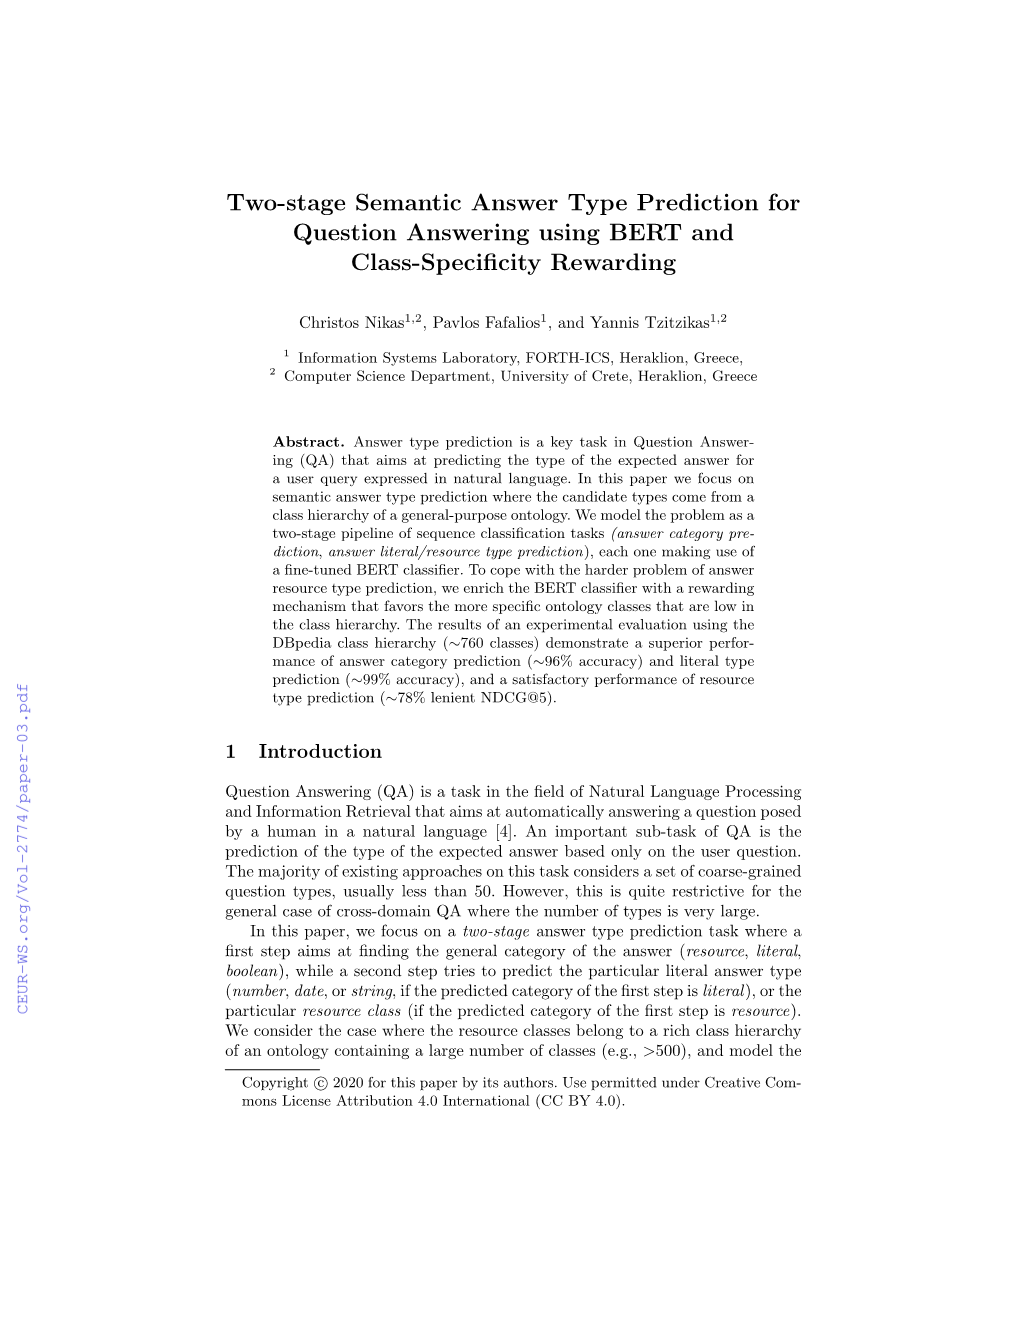 Two-Stage Semantic Answer Type Prediction for Question Answering Using BERT and Class-Speciﬁcity Rewarding